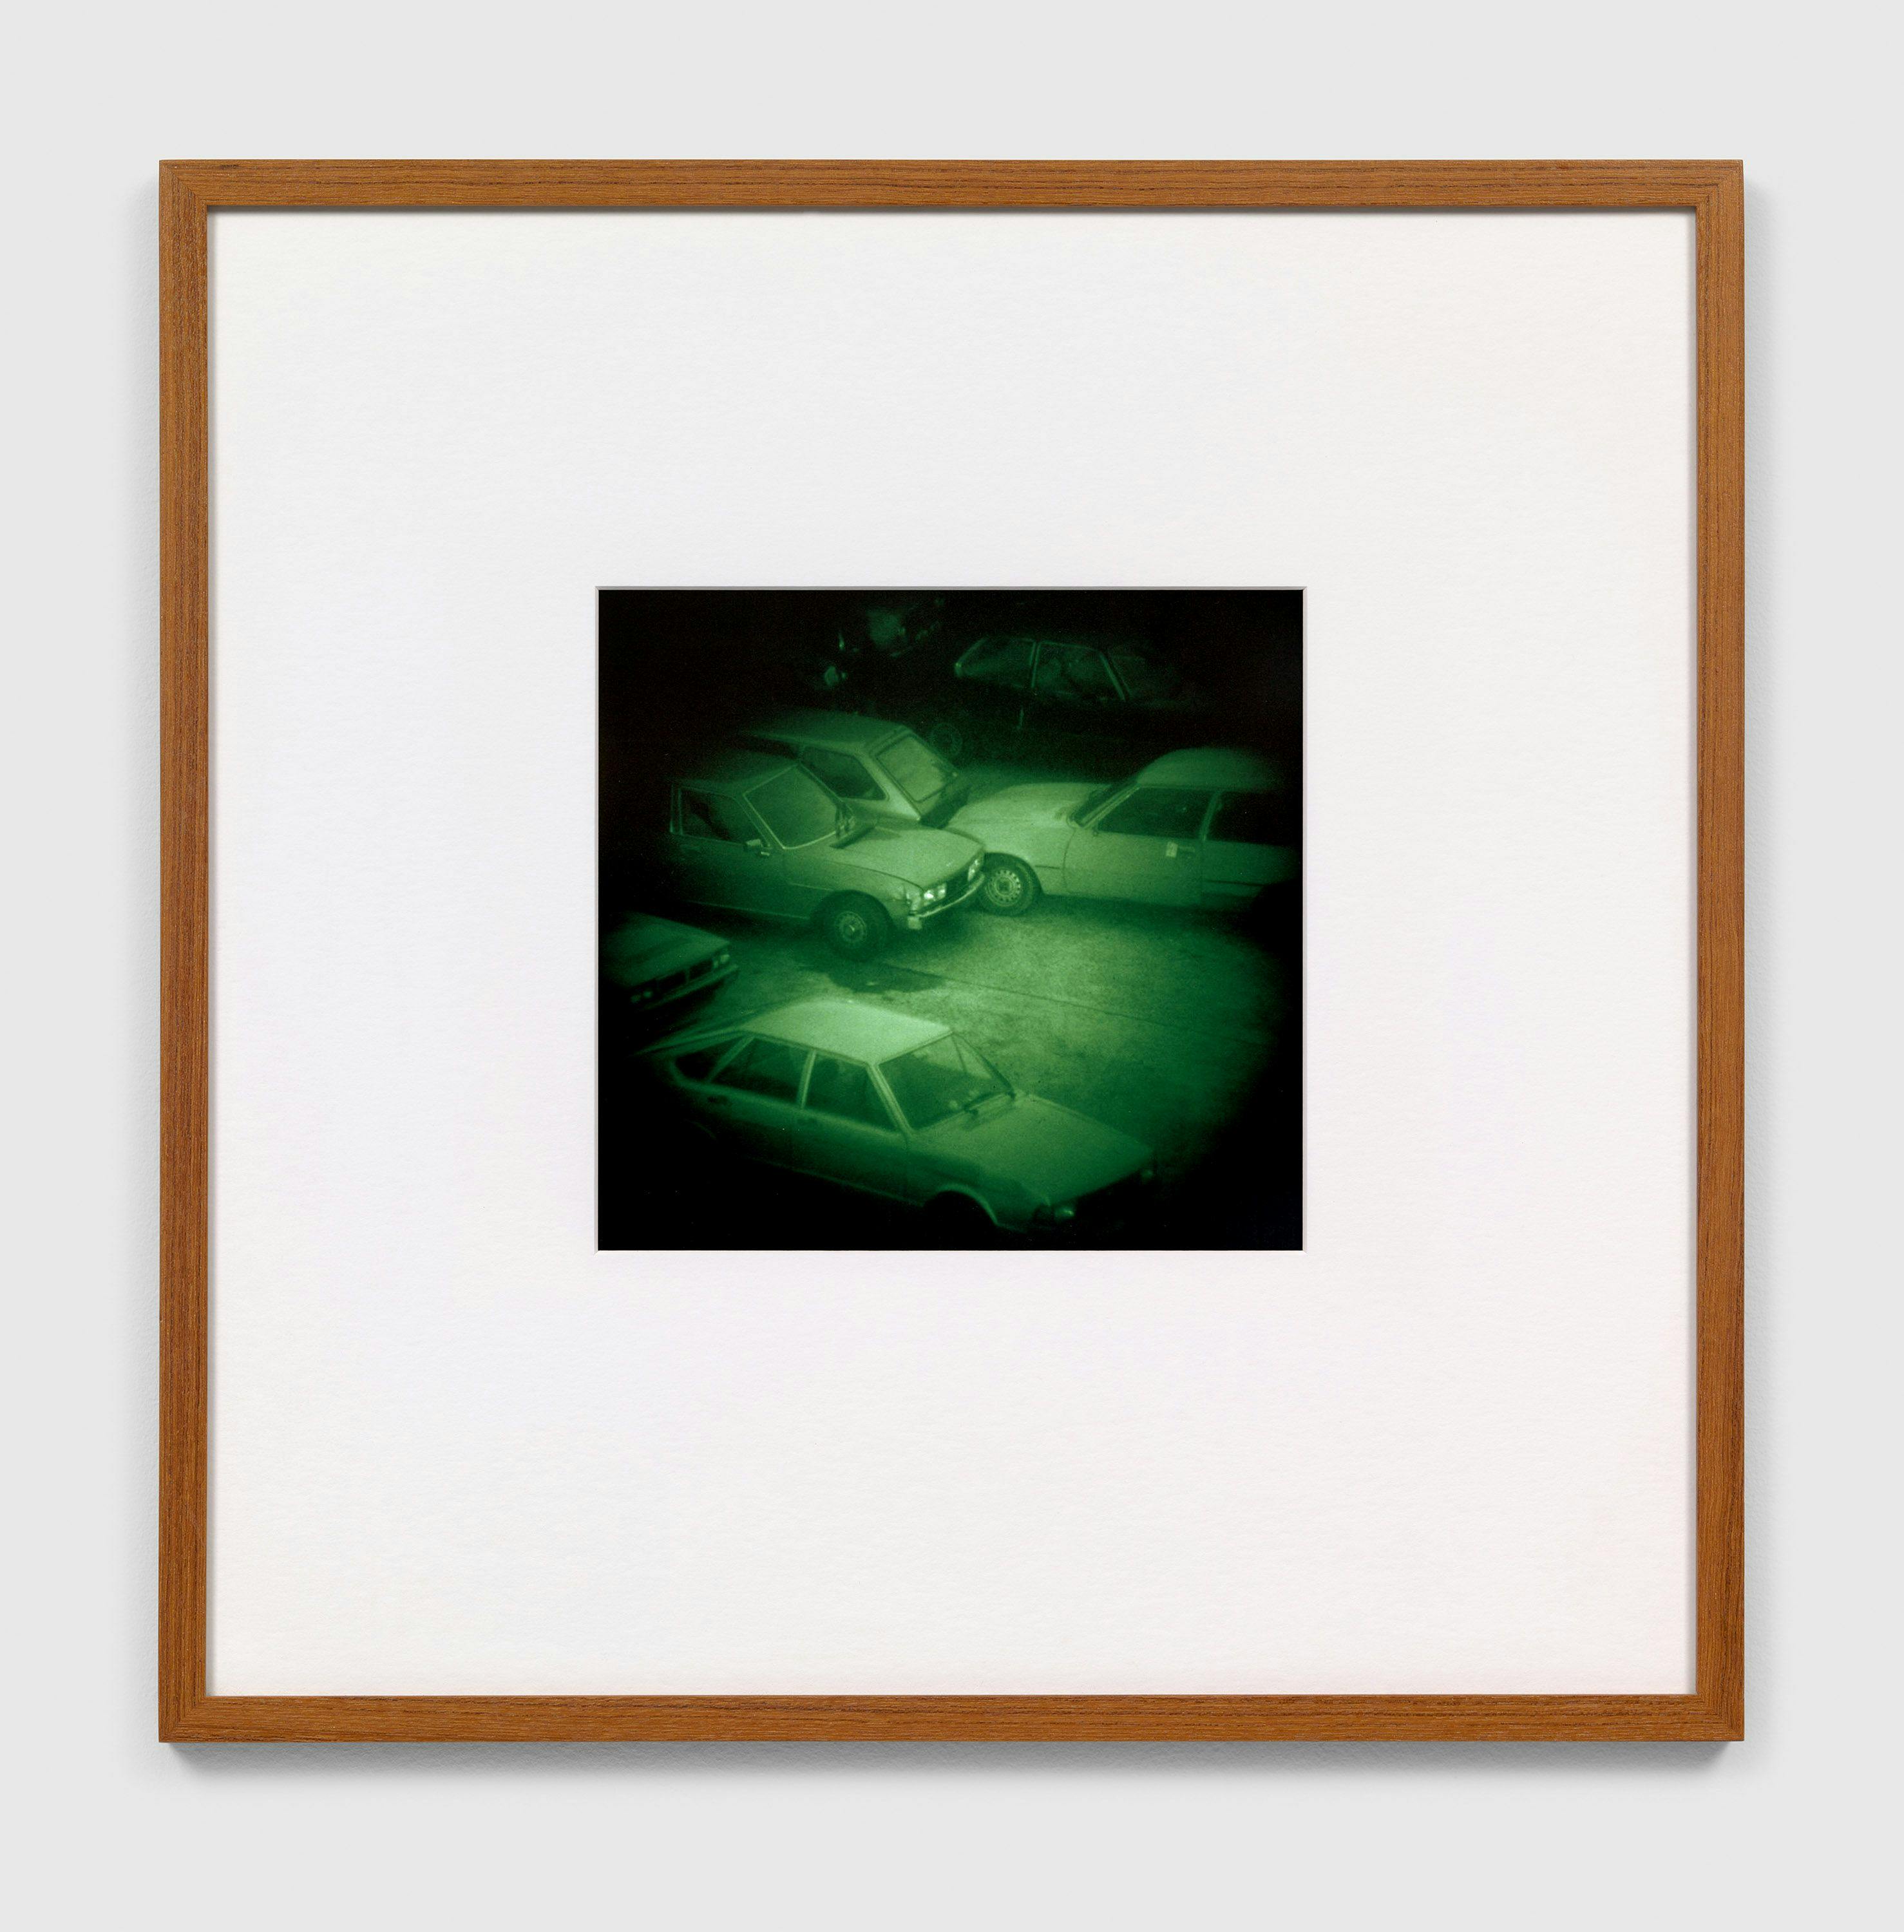 A photograph by Thomas Ruff, titled Nacht 9 II, dated 1992.